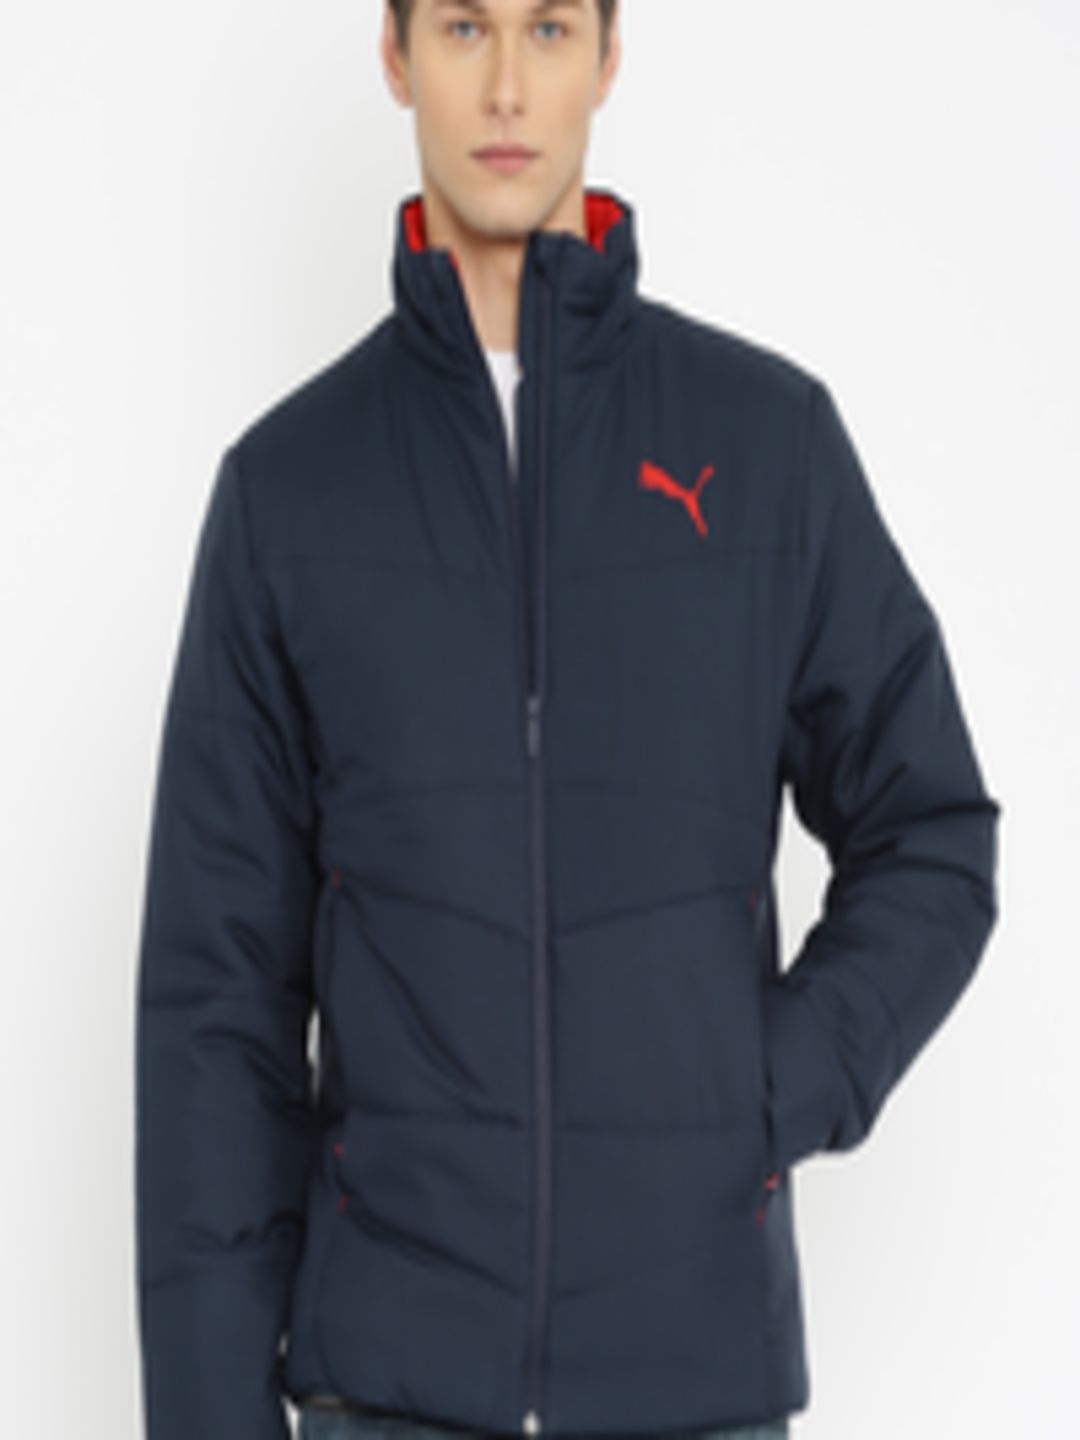 Buy PUMA Navy Quilted Jacket - Jackets for Men 1497371 | Myntra